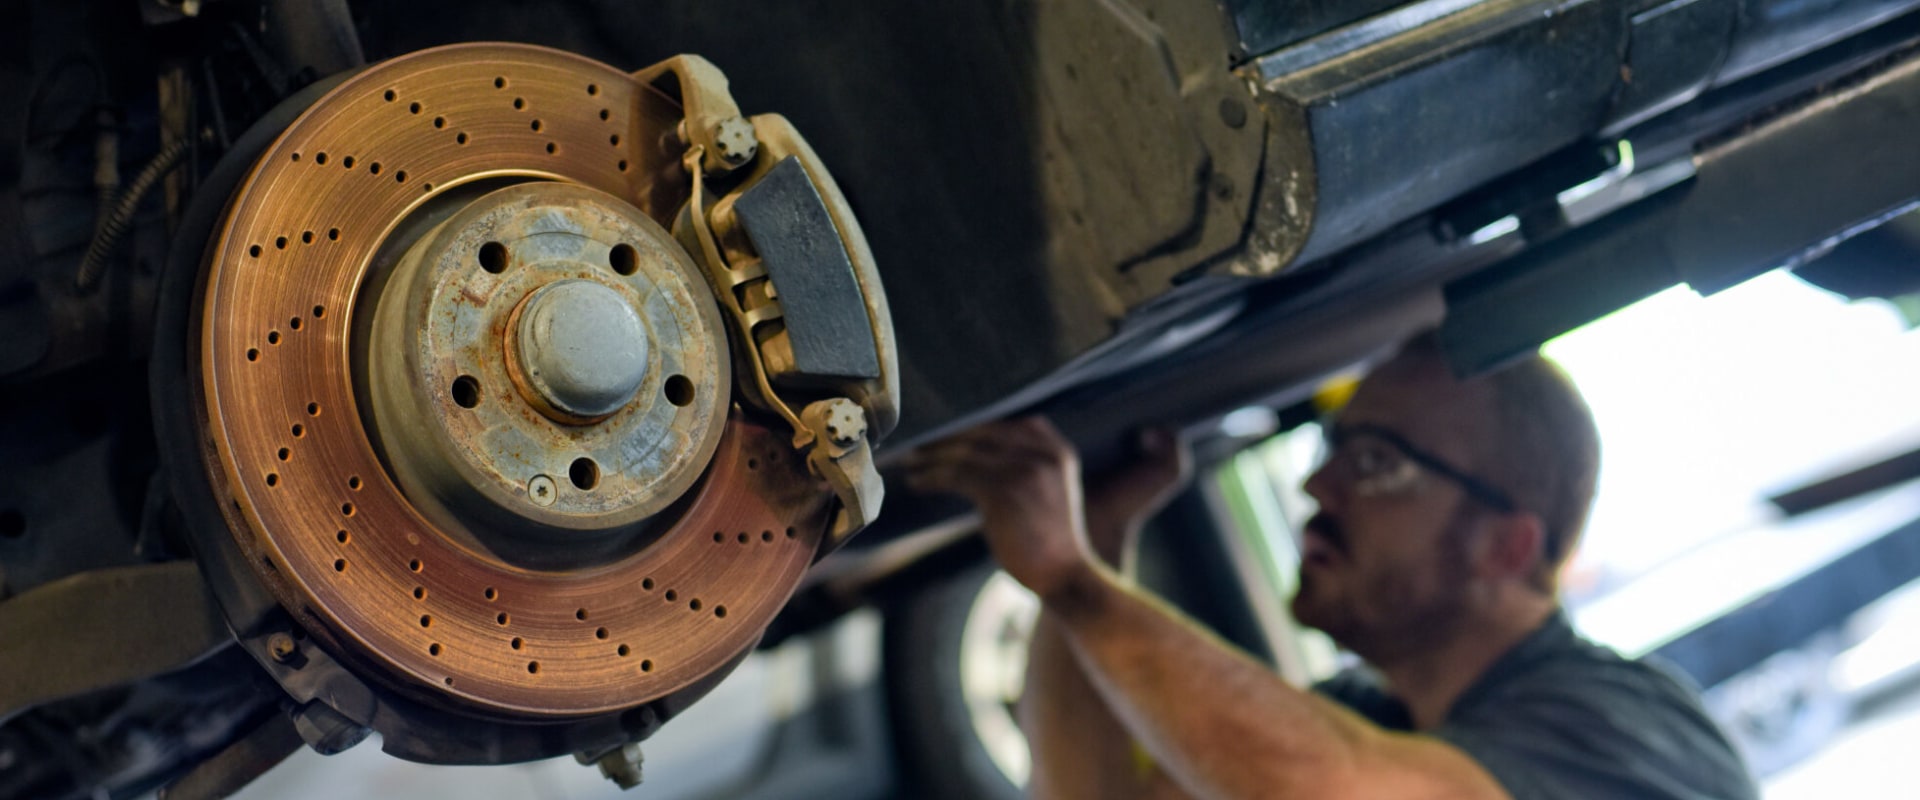 How to Check for Worn Brakes During Automotive Maintenance and Repair